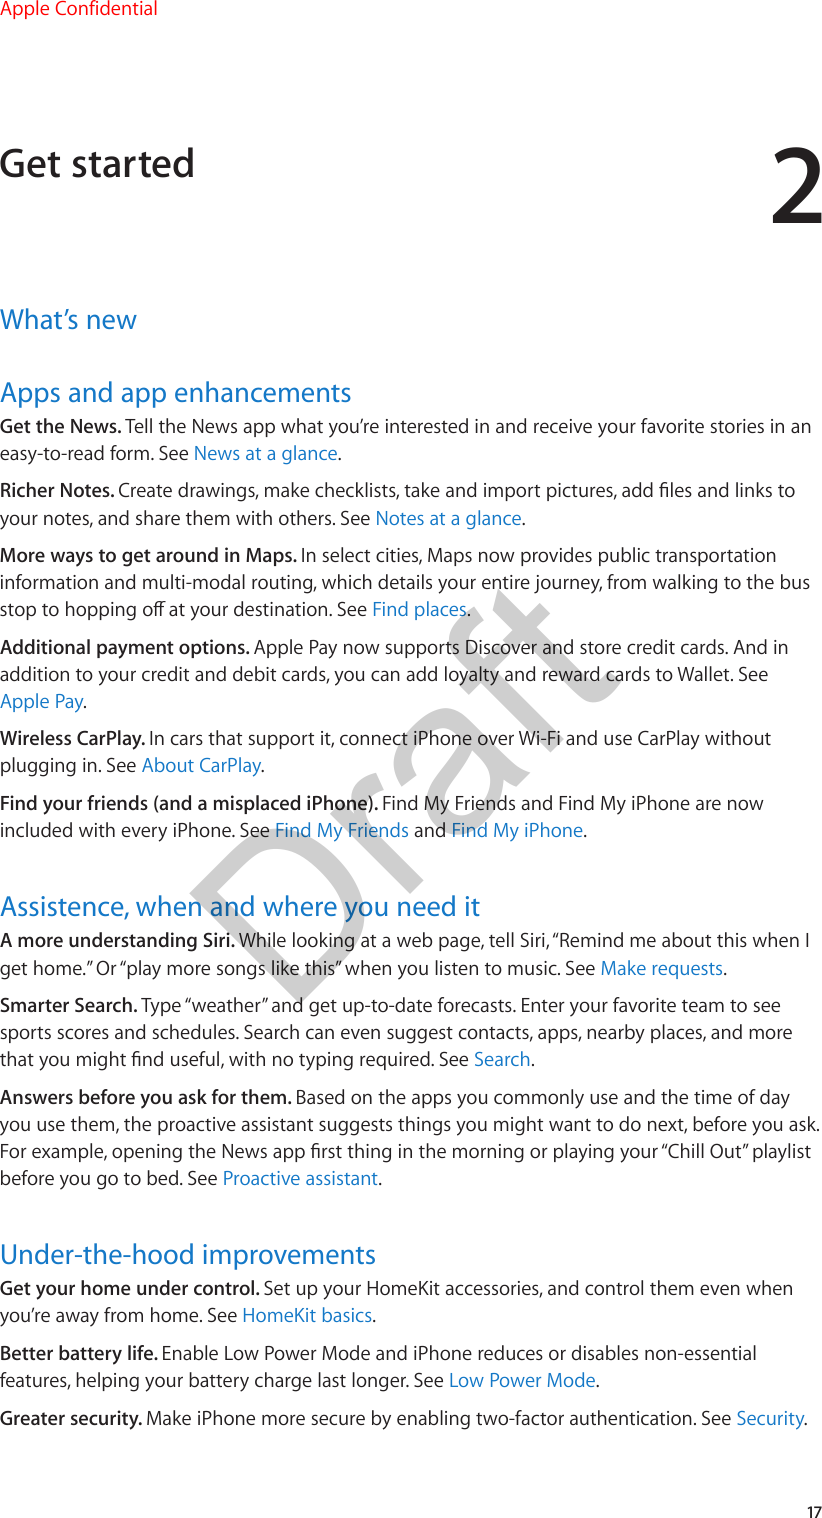 217What’s newApps and app enhancementsGet the News. Tell the News app what you’re interested in and receive your favorite stories in an easy-to-read form. See News at a glance.Richer Notes. Create drawings, make checklists, take and import pictures, add les and links to your notes, and share them with others. See Notes at a glance.More ways to get around in Maps. In select cities, Maps now provides public transportation information and multi-modal routing, which details your entire journey, from walking to the bus stop to hopping o at your destination. See Find places.Additional payment options. Apple Pay now supports Discover and store credit cards. And in addition to your credit and debit cards, you can add loyalty and reward cards to Wallet. See Apple Pay.Wireless CarPlay. In cars that support it, connect iPhone over Wi-Fi and use CarPlay without plugging in. See About CarPlay.Find your friends (and a misplaced iPhone). Find My Friends and Find My iPhone are now included with every iPhone. See Find My Friends and Find My iPhone.Assistence, when and where you need itA more understanding Siri. While looking at a web page, tell Siri, “Remind me about this when I get home.” Or “play more songs like this” when you listen to music. See Make requests.Smarter Search. Type “weather” and get up-to-date forecasts. Enter your favorite team to see sports scores and schedules. Search can even suggest contacts, apps, nearby places, and more that you might nd useful, with no typing required. See Search.Answers before you ask for them. Based on the apps you commonly use and the time of day you use them, the proactive assistant suggests things you might want to do next, before you ask. For example, opening the News app rst thing in the morning or playing your “Chill Out” playlist before you go to bed. See Proactive assistant.Under-the-hood improvementsGet your home under control. Set up your HomeKit accessories, and control them even when you’re away from home. See HomeKit basics.Better battery life. Enable Low Power Mode and iPhone reduces or disables non-essential features, helping your battery charge last longer. See Low Power Mode.Greater security. Make iPhone more secure by enabling two-factor authentication. See Security.Get startedApple ConfidentialDraft